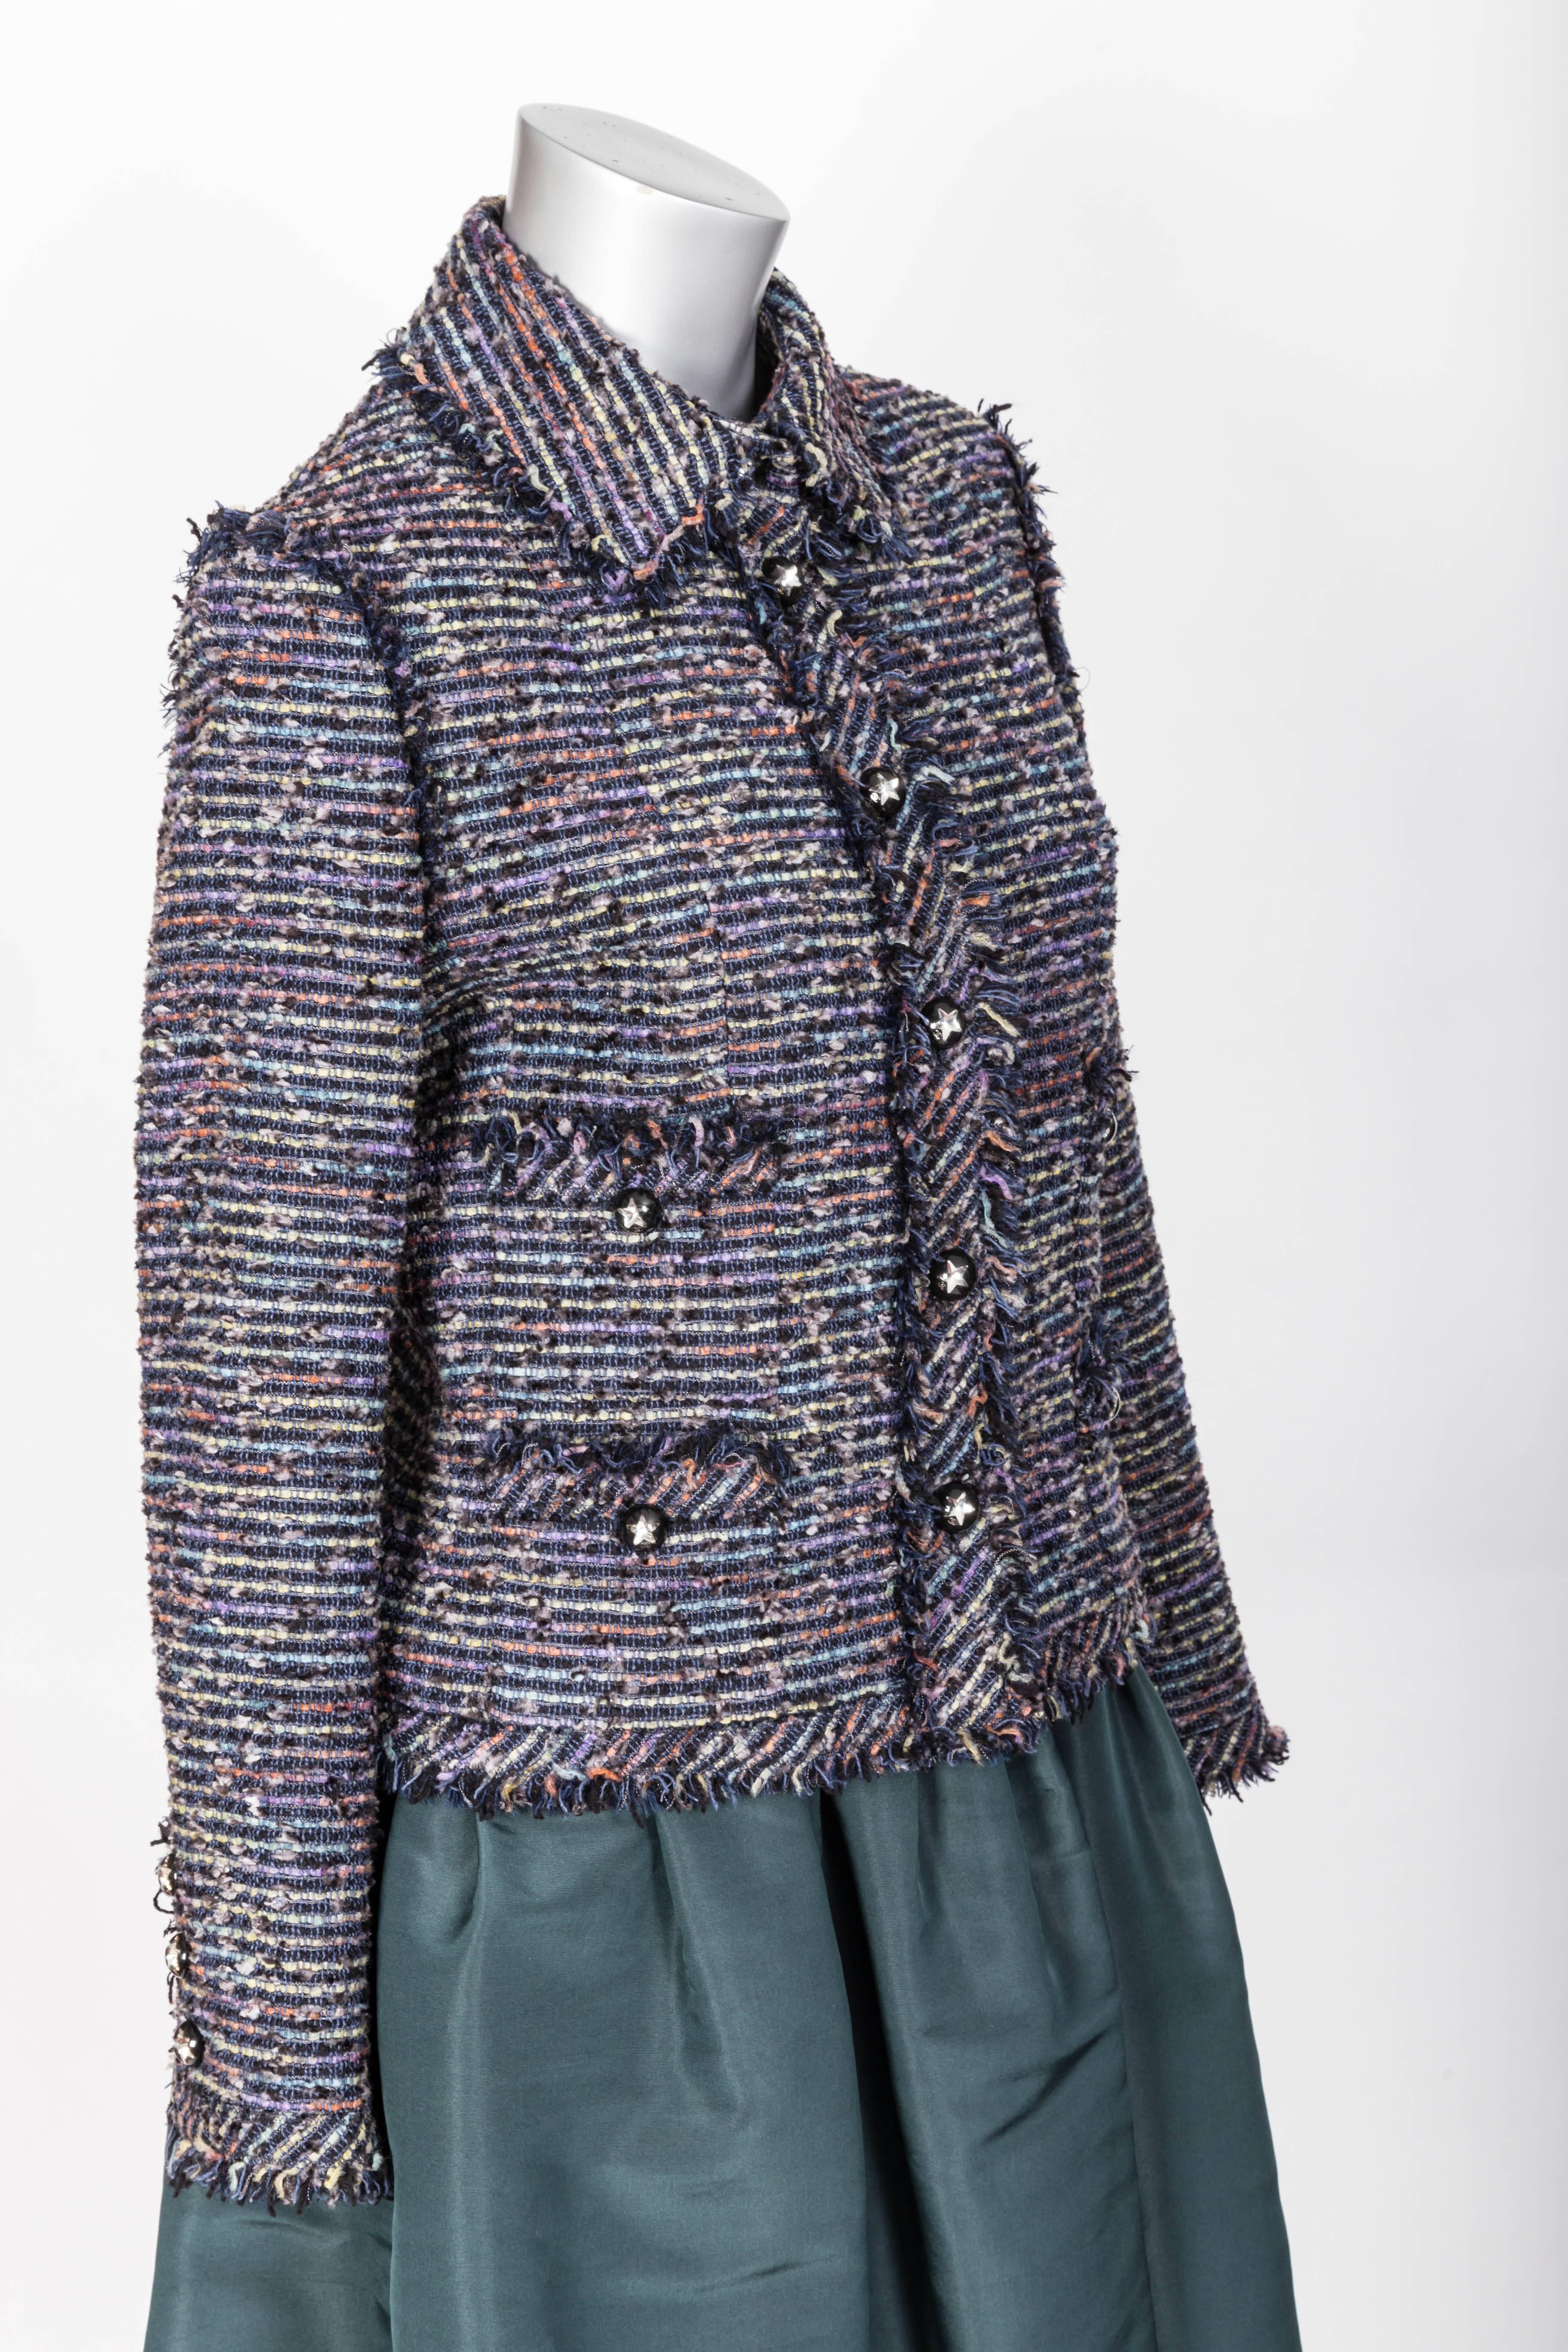 Chanel Tweed Jacket with Fringe Trim FR 40 / US 8 In Excellent Condition In Westhampton Beach, NY